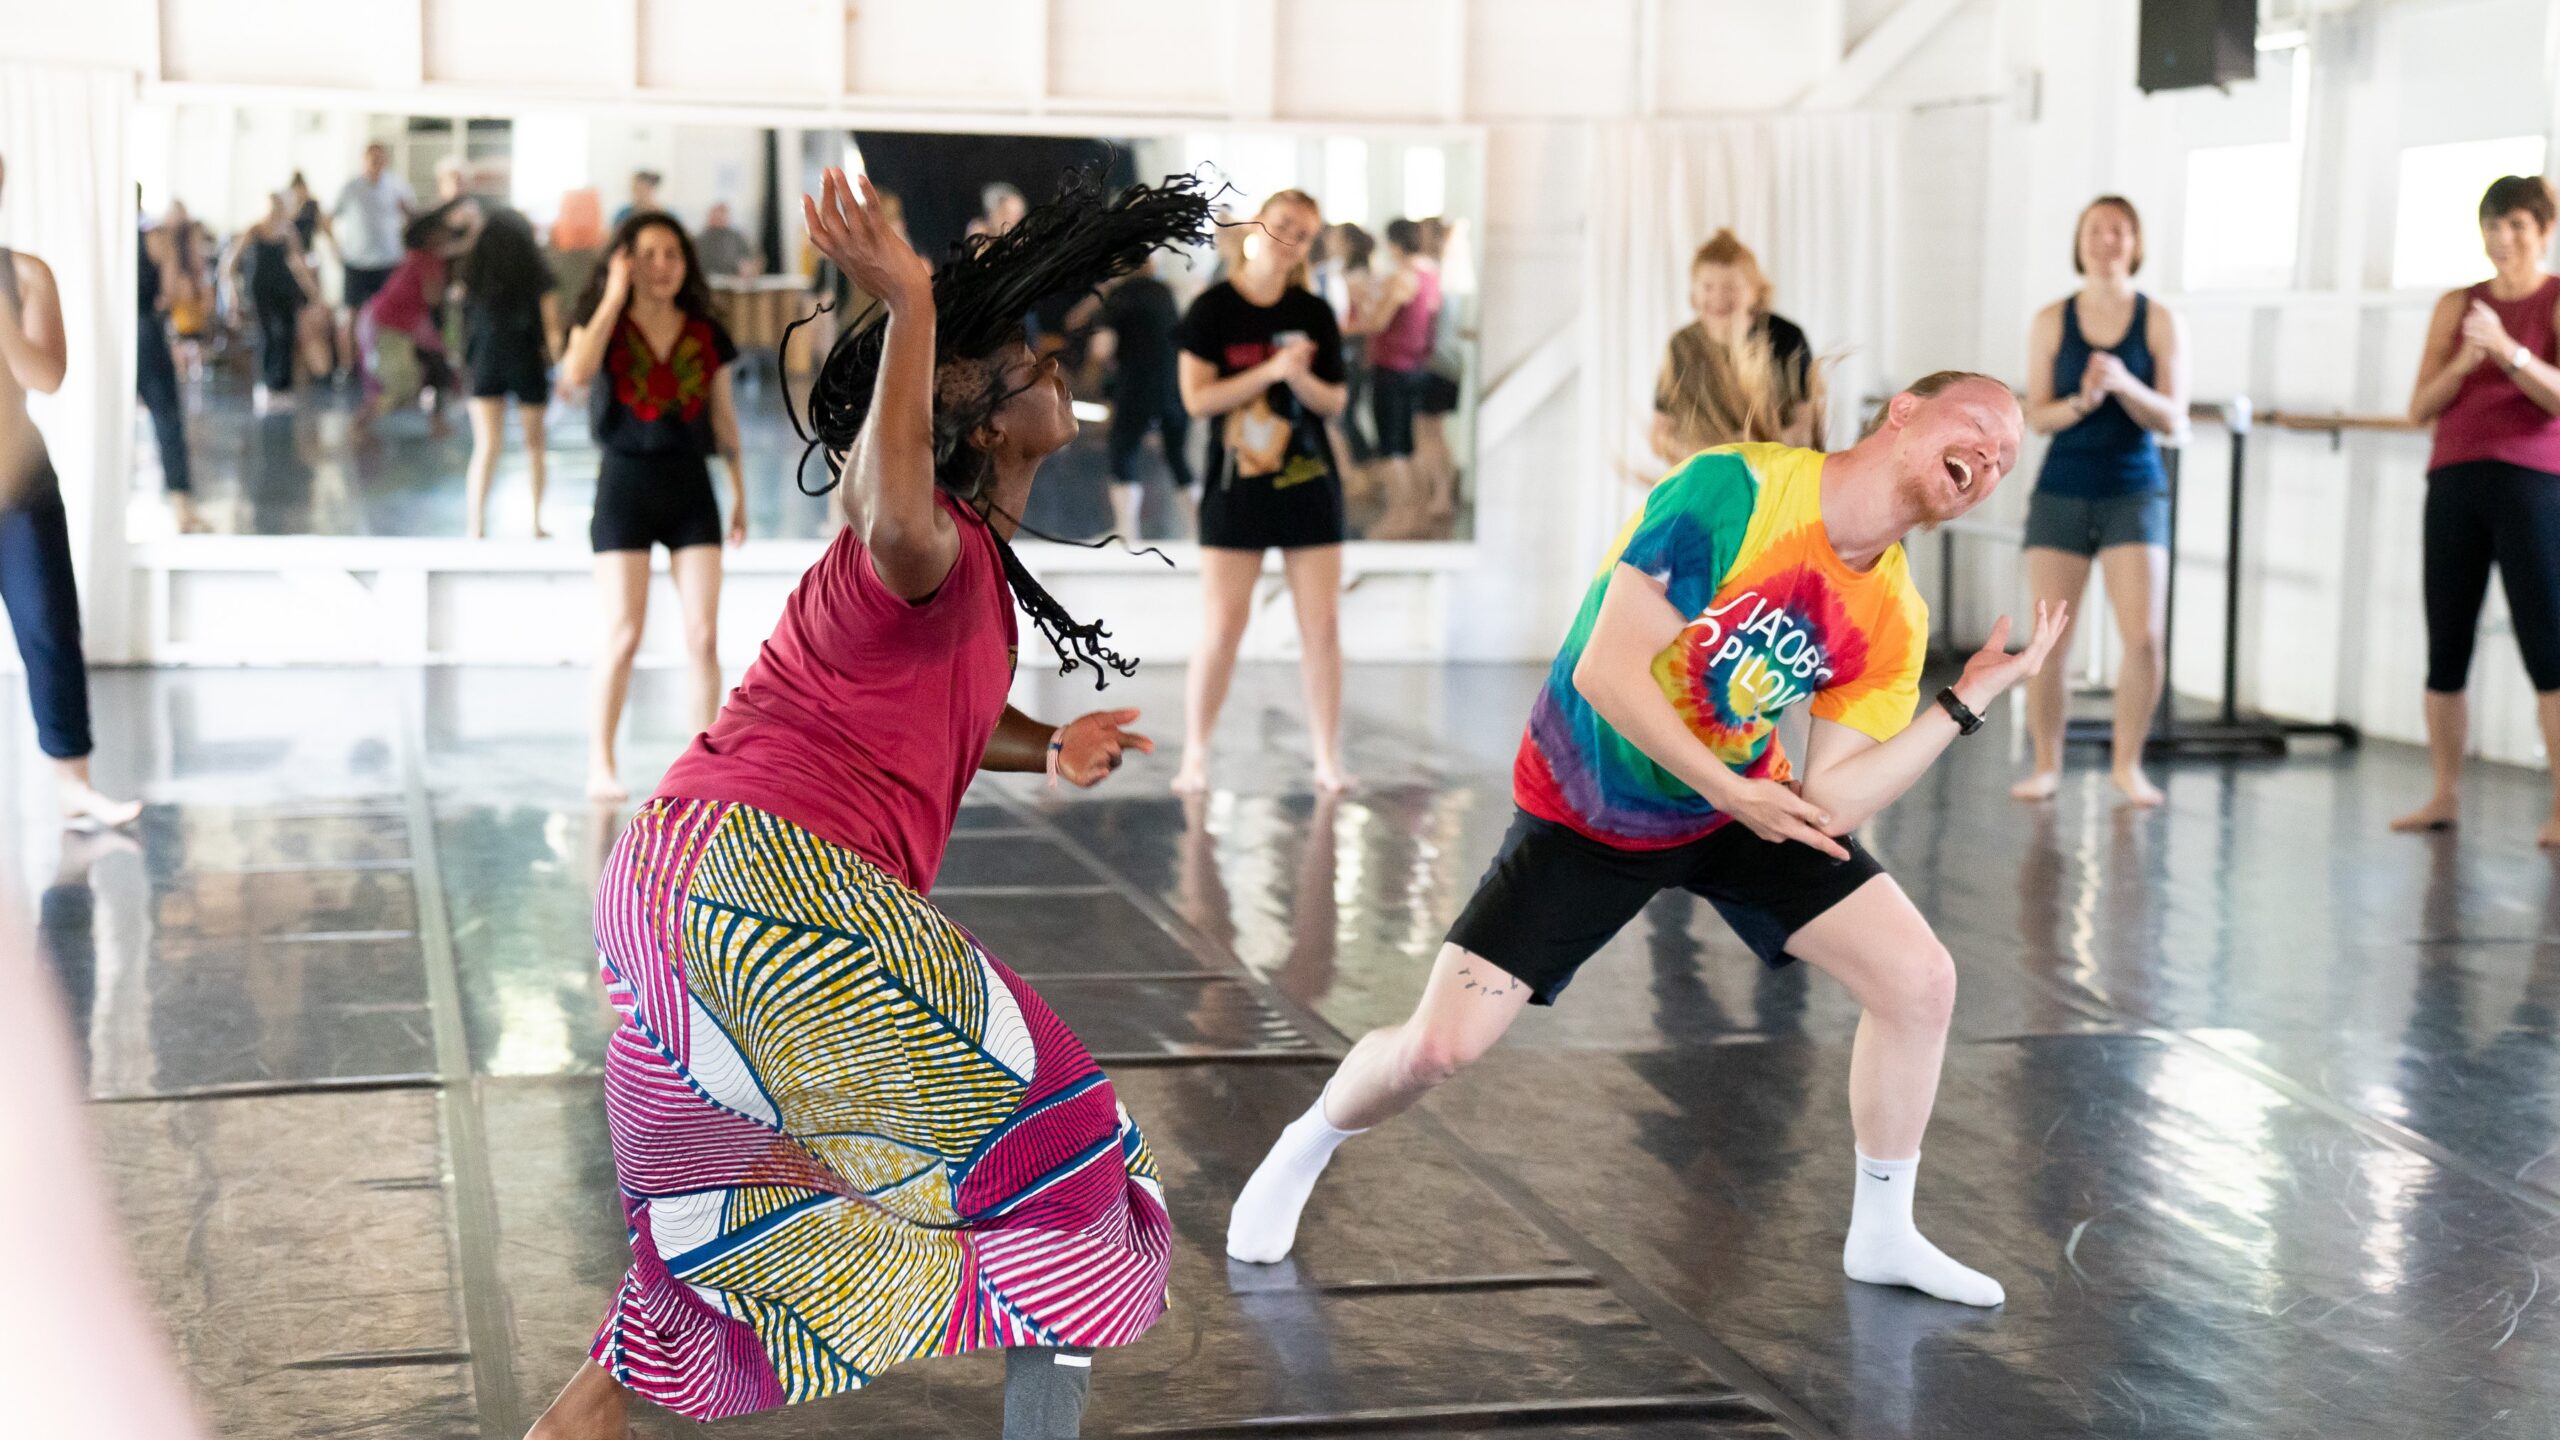 2 dancers appear mid-movement in a West African dance class. The dancer on the left is a middle-aged Black woman wearing a pink t-shirt and patterned skirt. The dancer on the right is red-haired dancer in their early twenties wearing a tie-dyed t-shirt and black shorts.